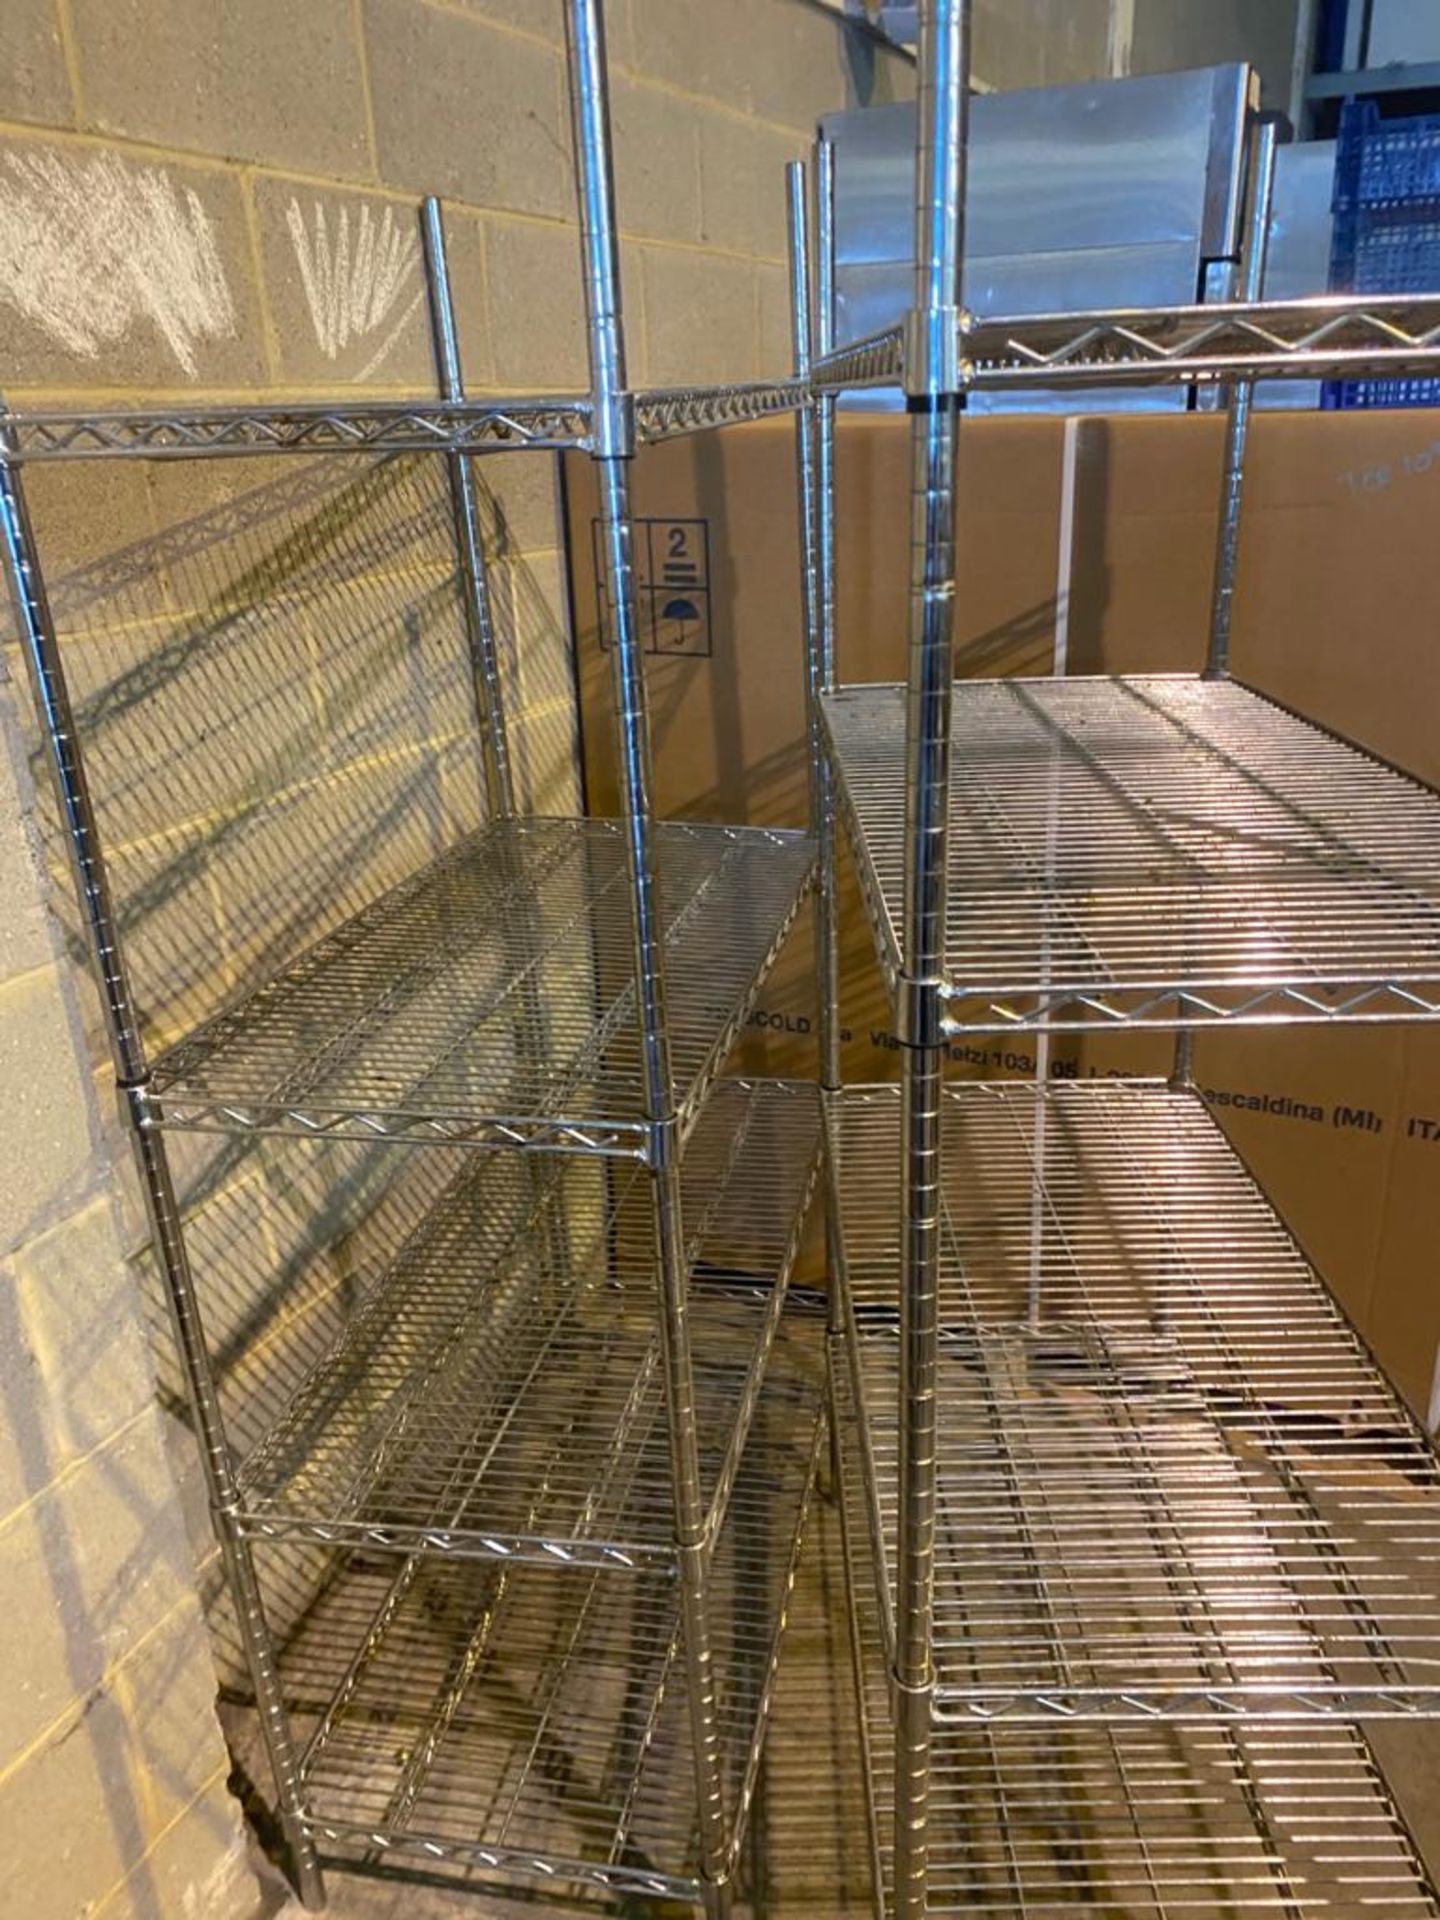 2 x Four Tier Wire Storage Shelves For Commercial Kitchens - Image 2 of 5